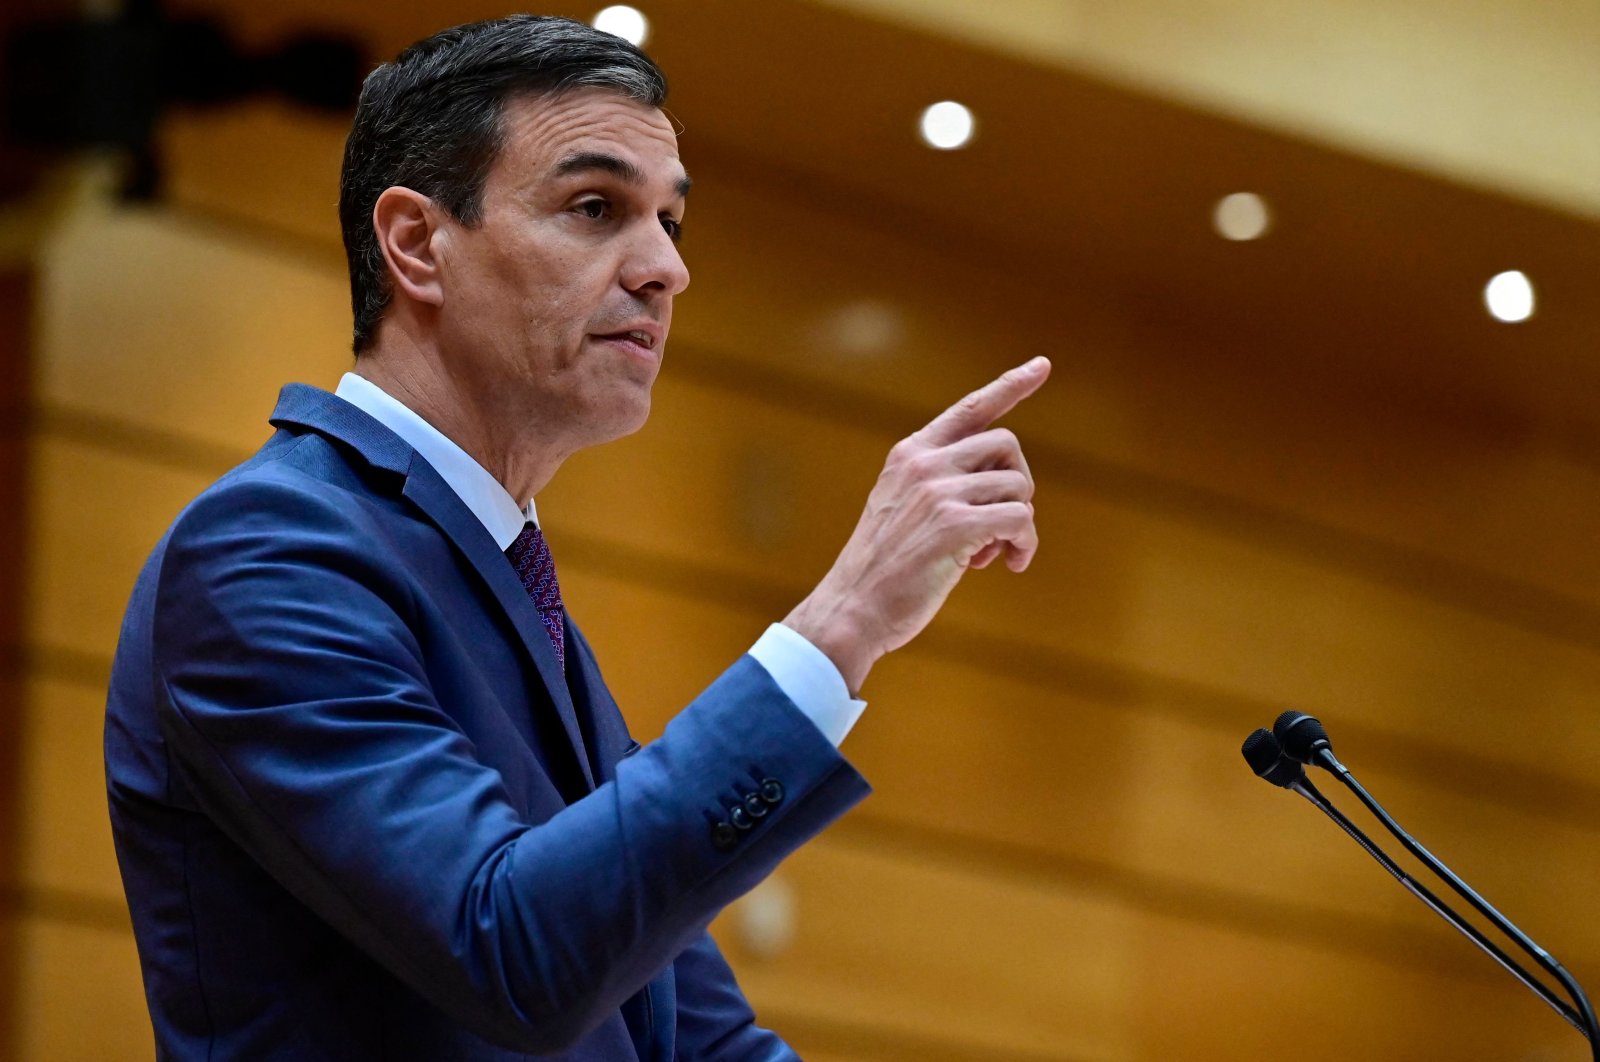 Spanish Prime Minister Pedro Sanchez speaks during a plenary session at the Senate in Madrid, on Jan. 31, 2023. (AFP Photo)